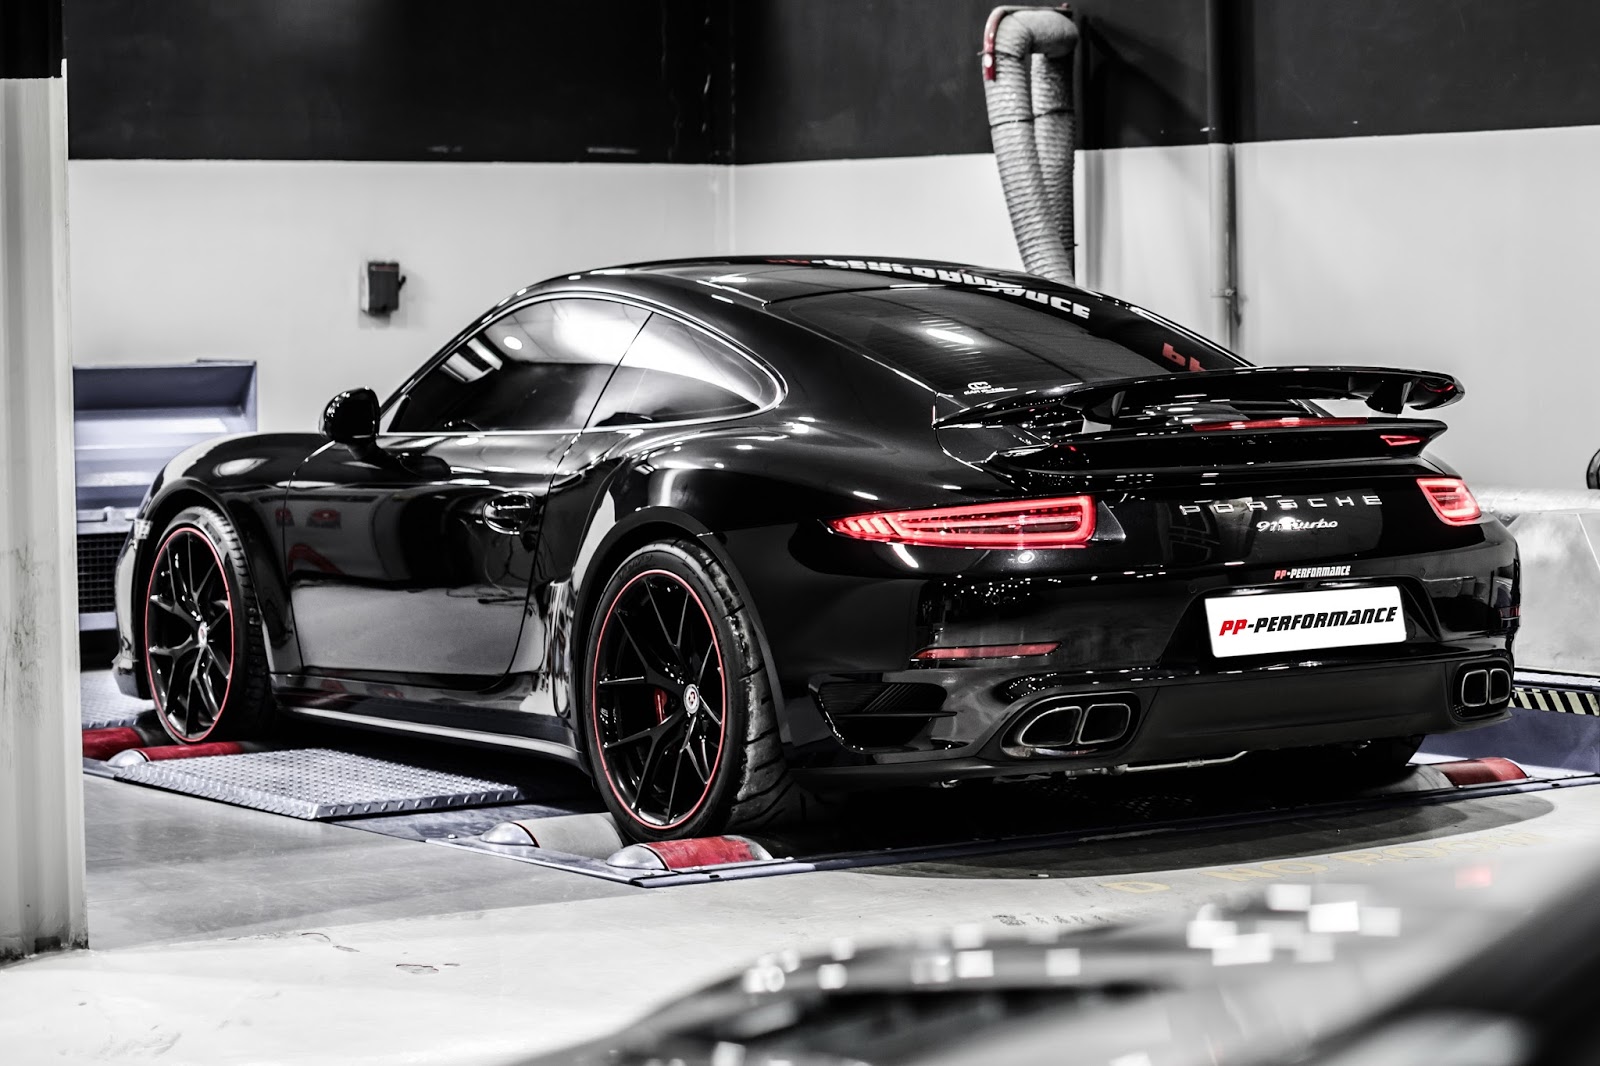 PP Performance-Tuned Porsche 991 Turbo Does 1/4 Mile in 9.9 Sec [w/Video] | Carscoops1600 x 1066